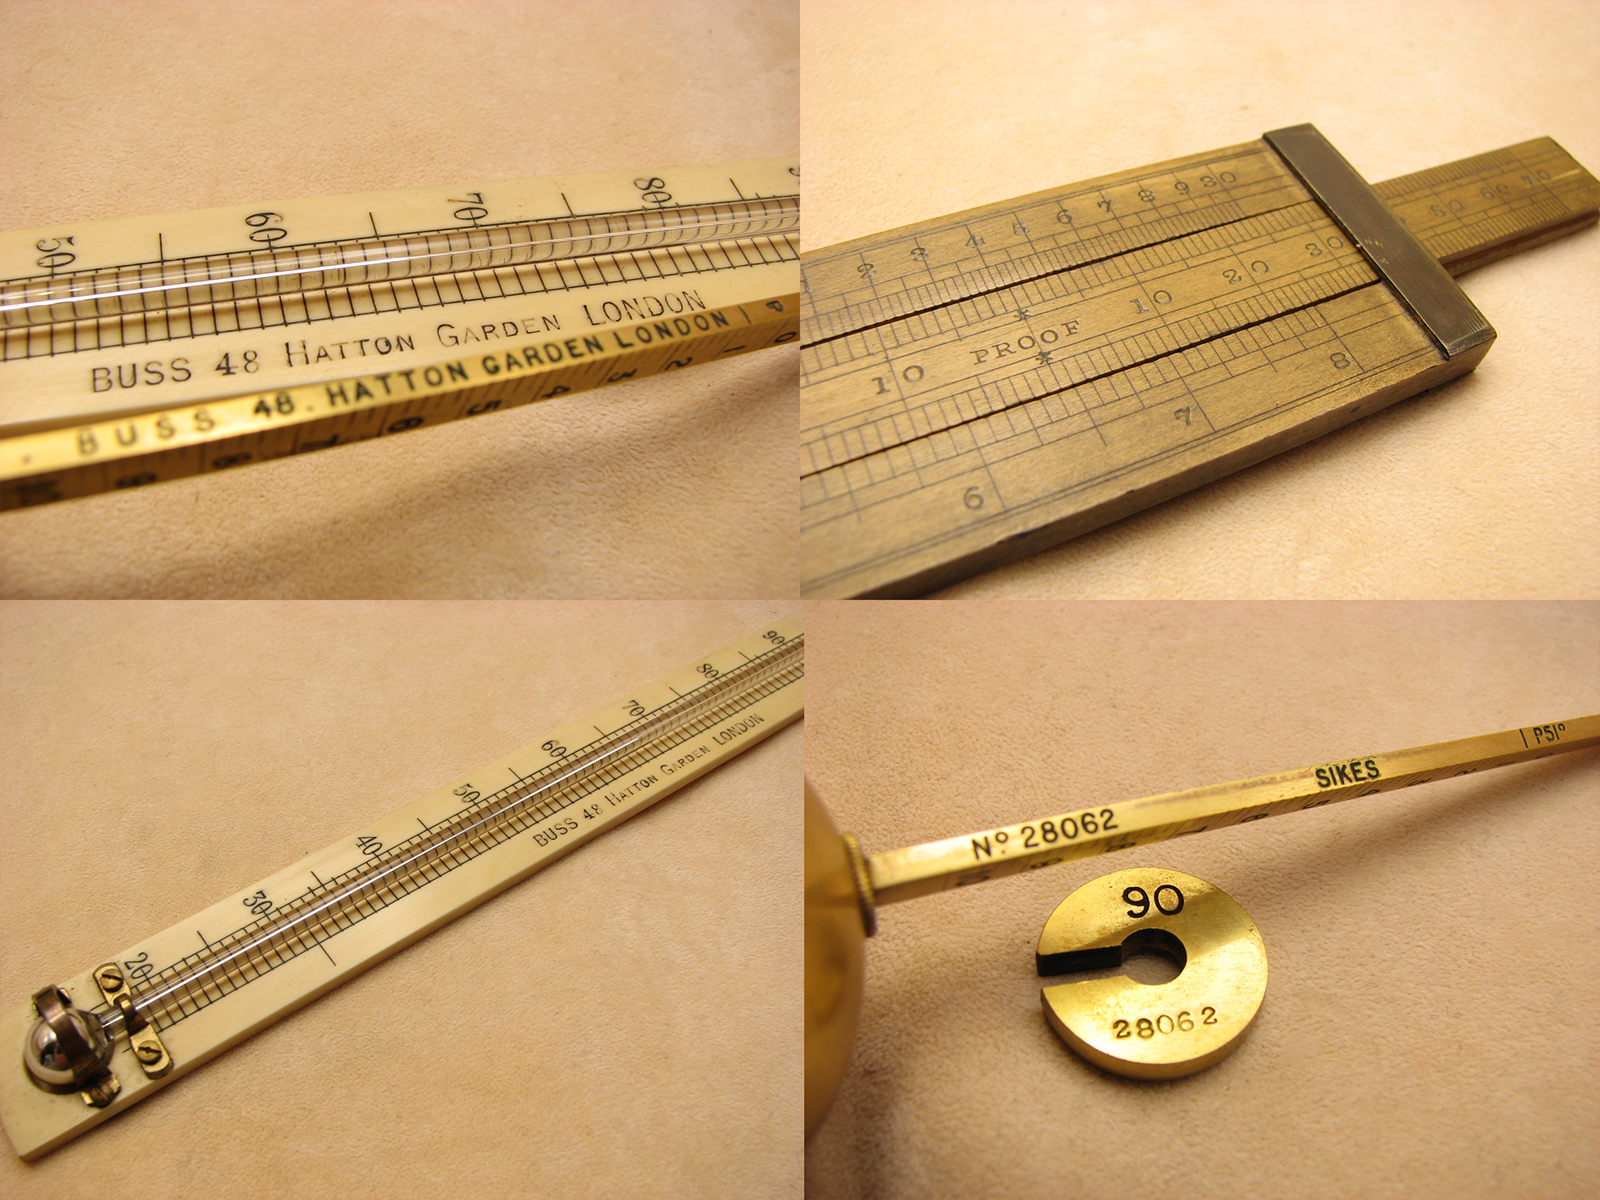 Antique Sike's hydrometer set with proof rule by BUSS, 48 Hatton Garden, London